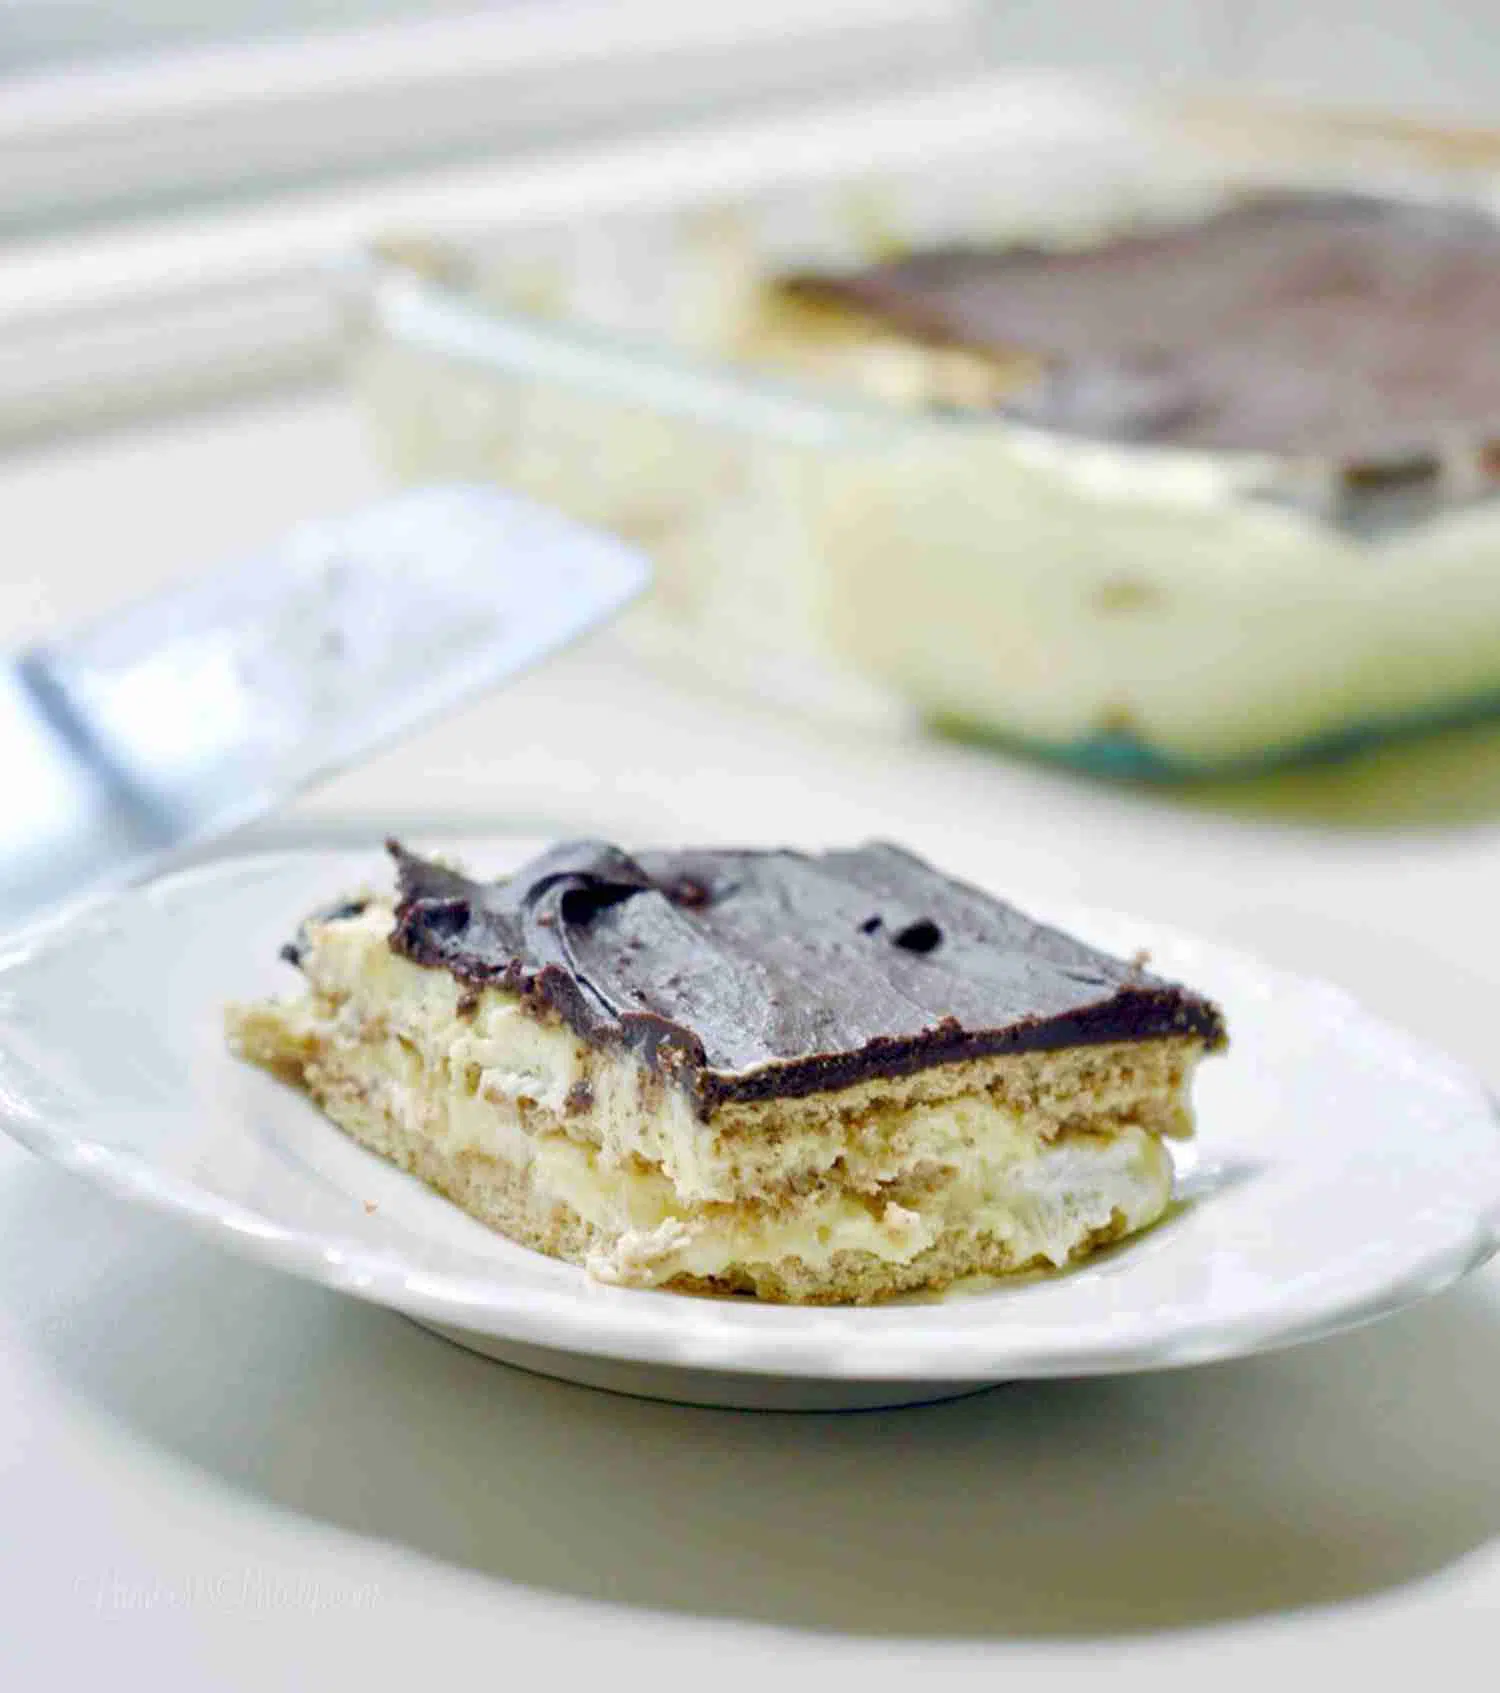 serving of chocolate eclair cake on a white plate, with baking dish in background.